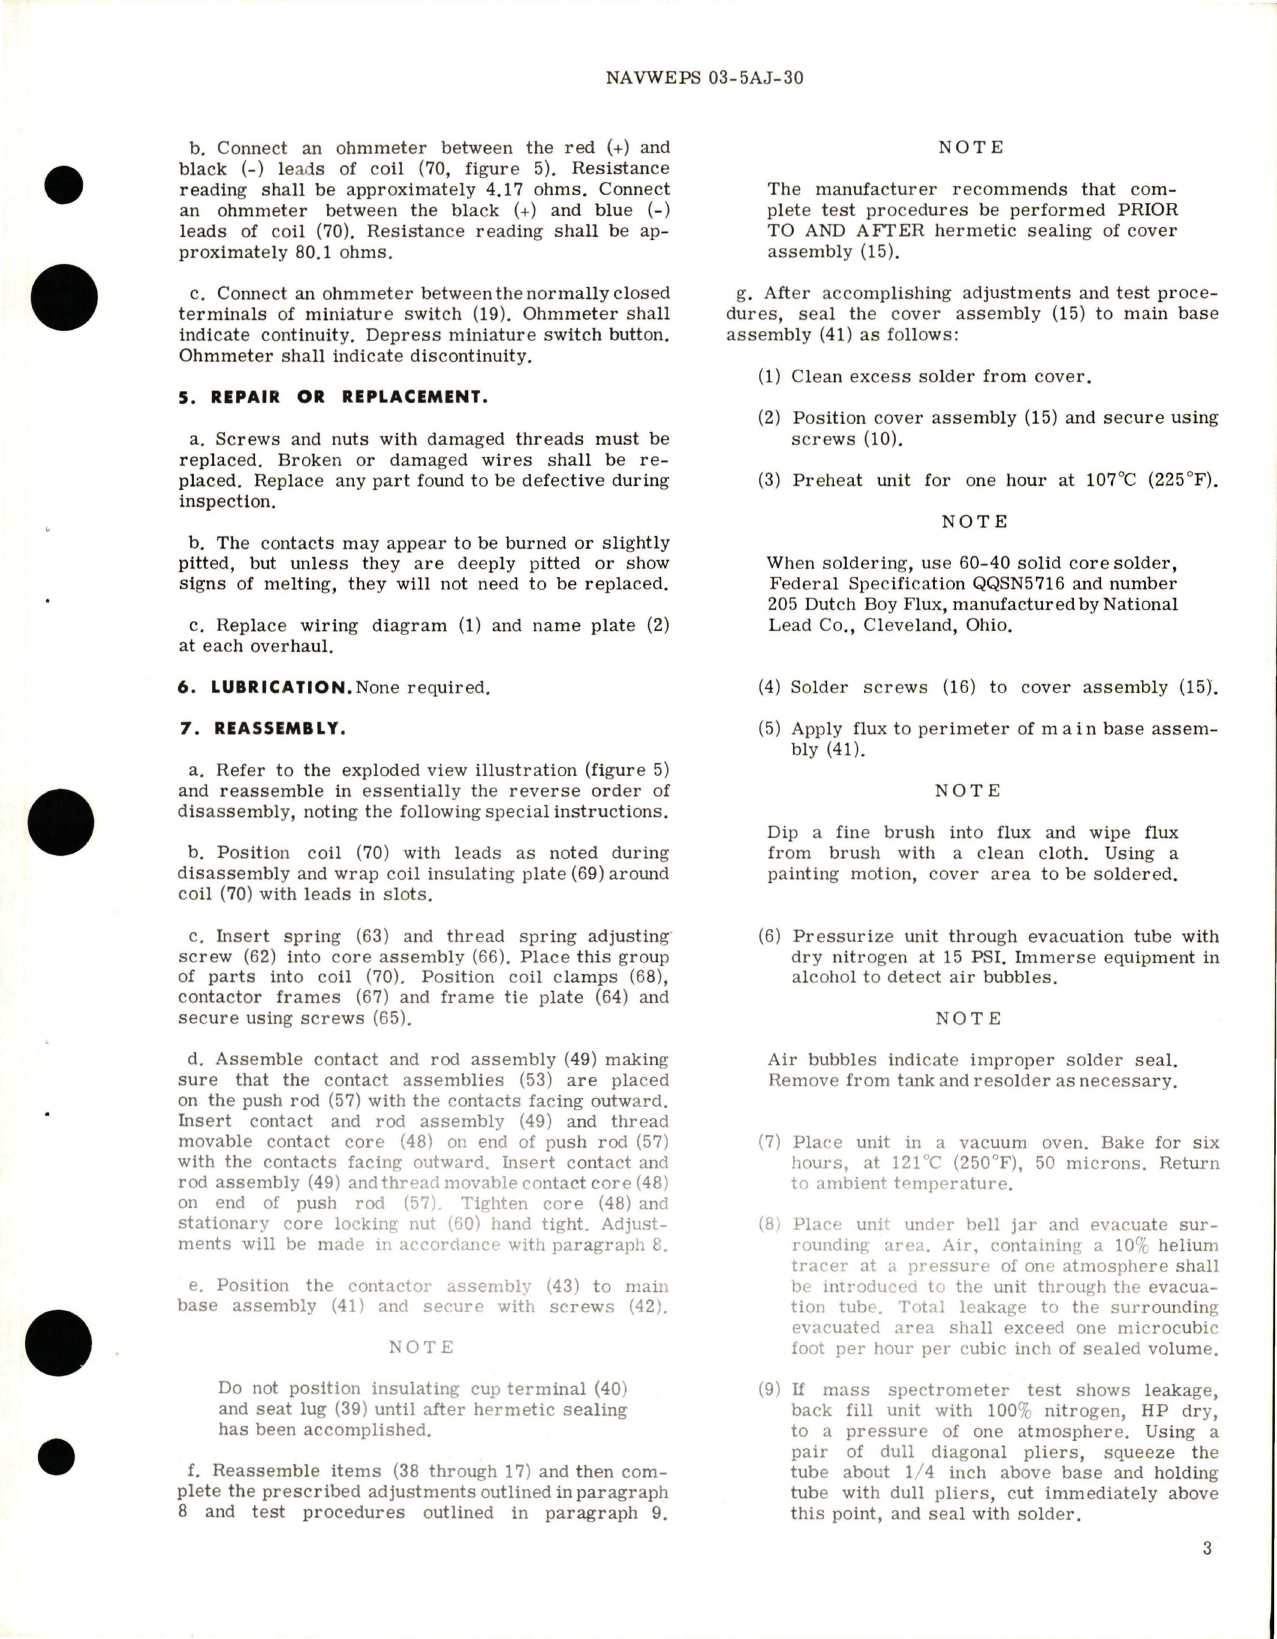 Sample page 5 from AirCorps Library document: Overhaul Instructions with Illustrated Parts Breakdown for Contractor - Part AH-965B 